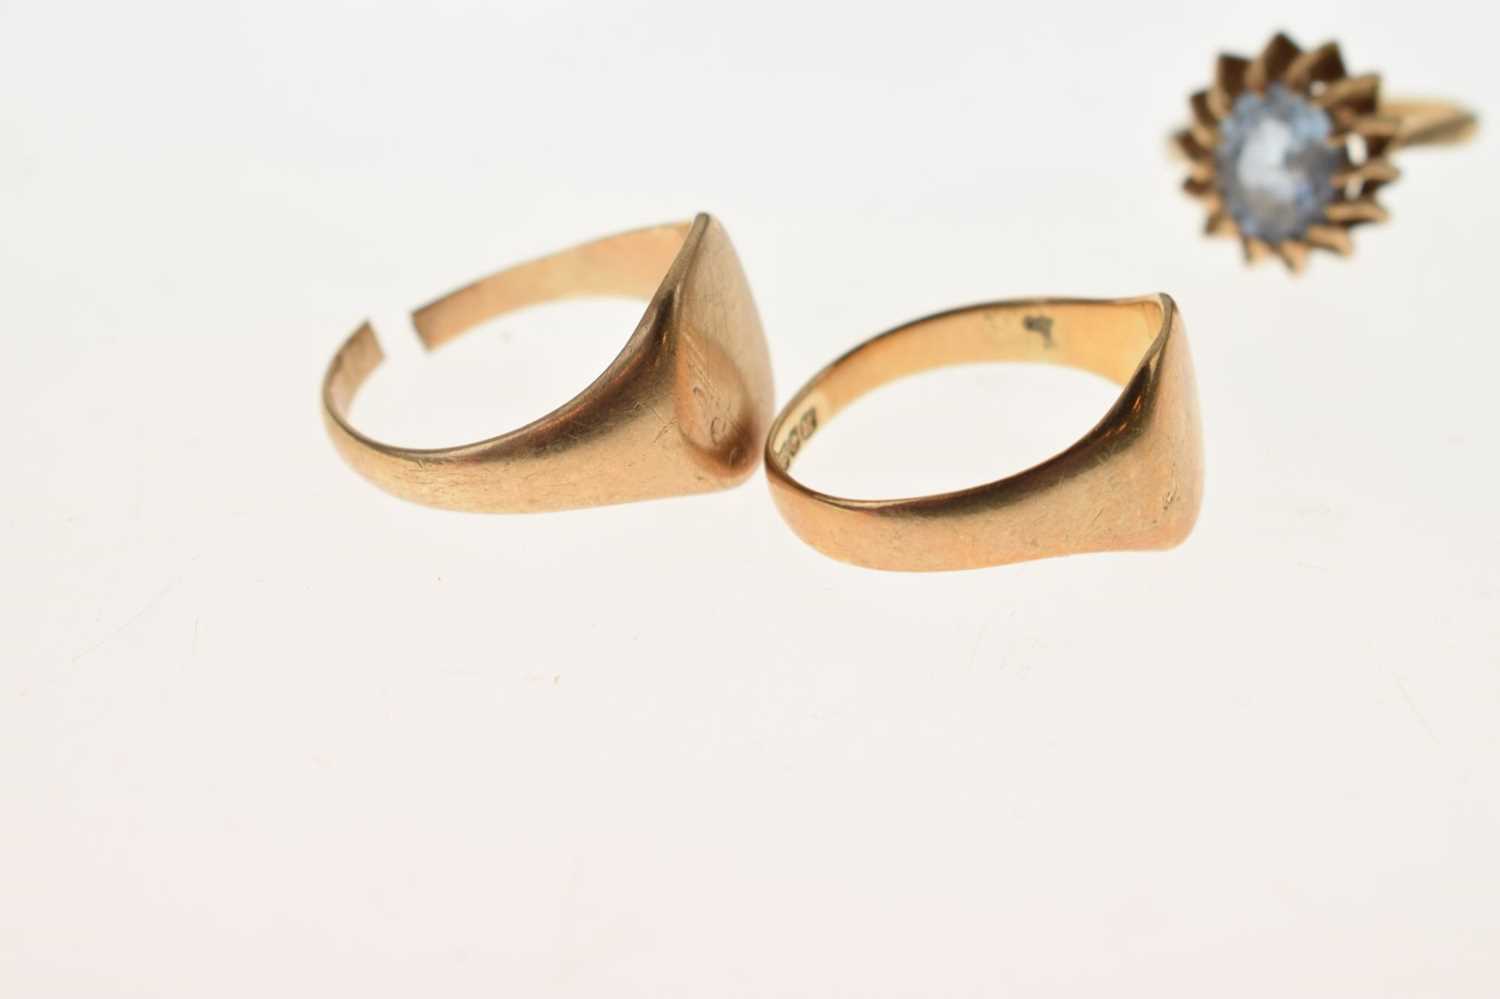 Two 9ct gold signet rings - Image 6 of 10